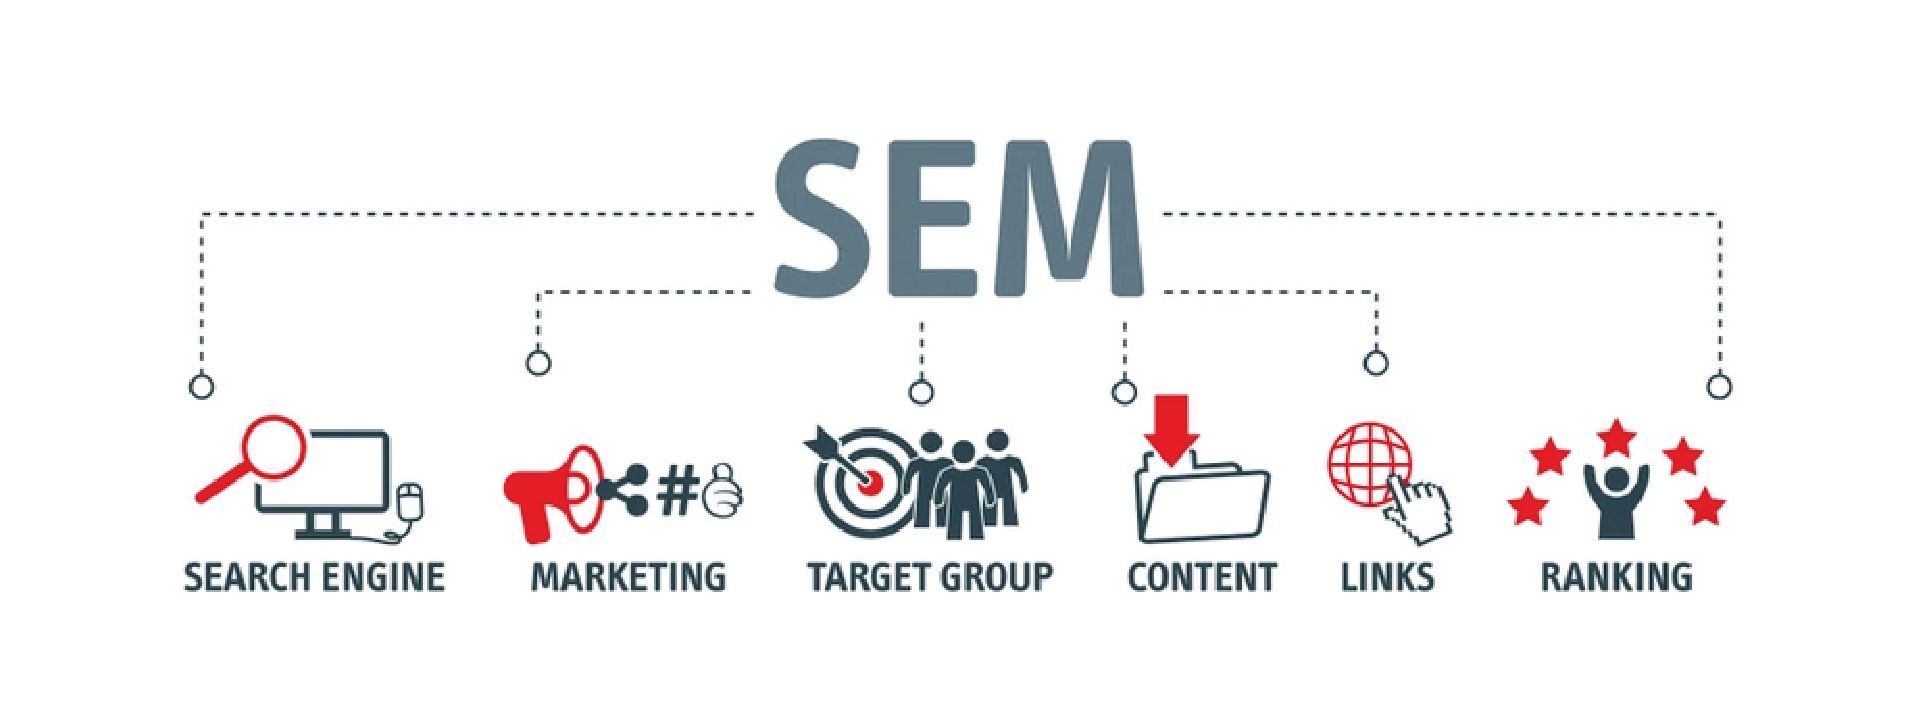 SEM: Tips, Benefits, & How It Relates To SEO